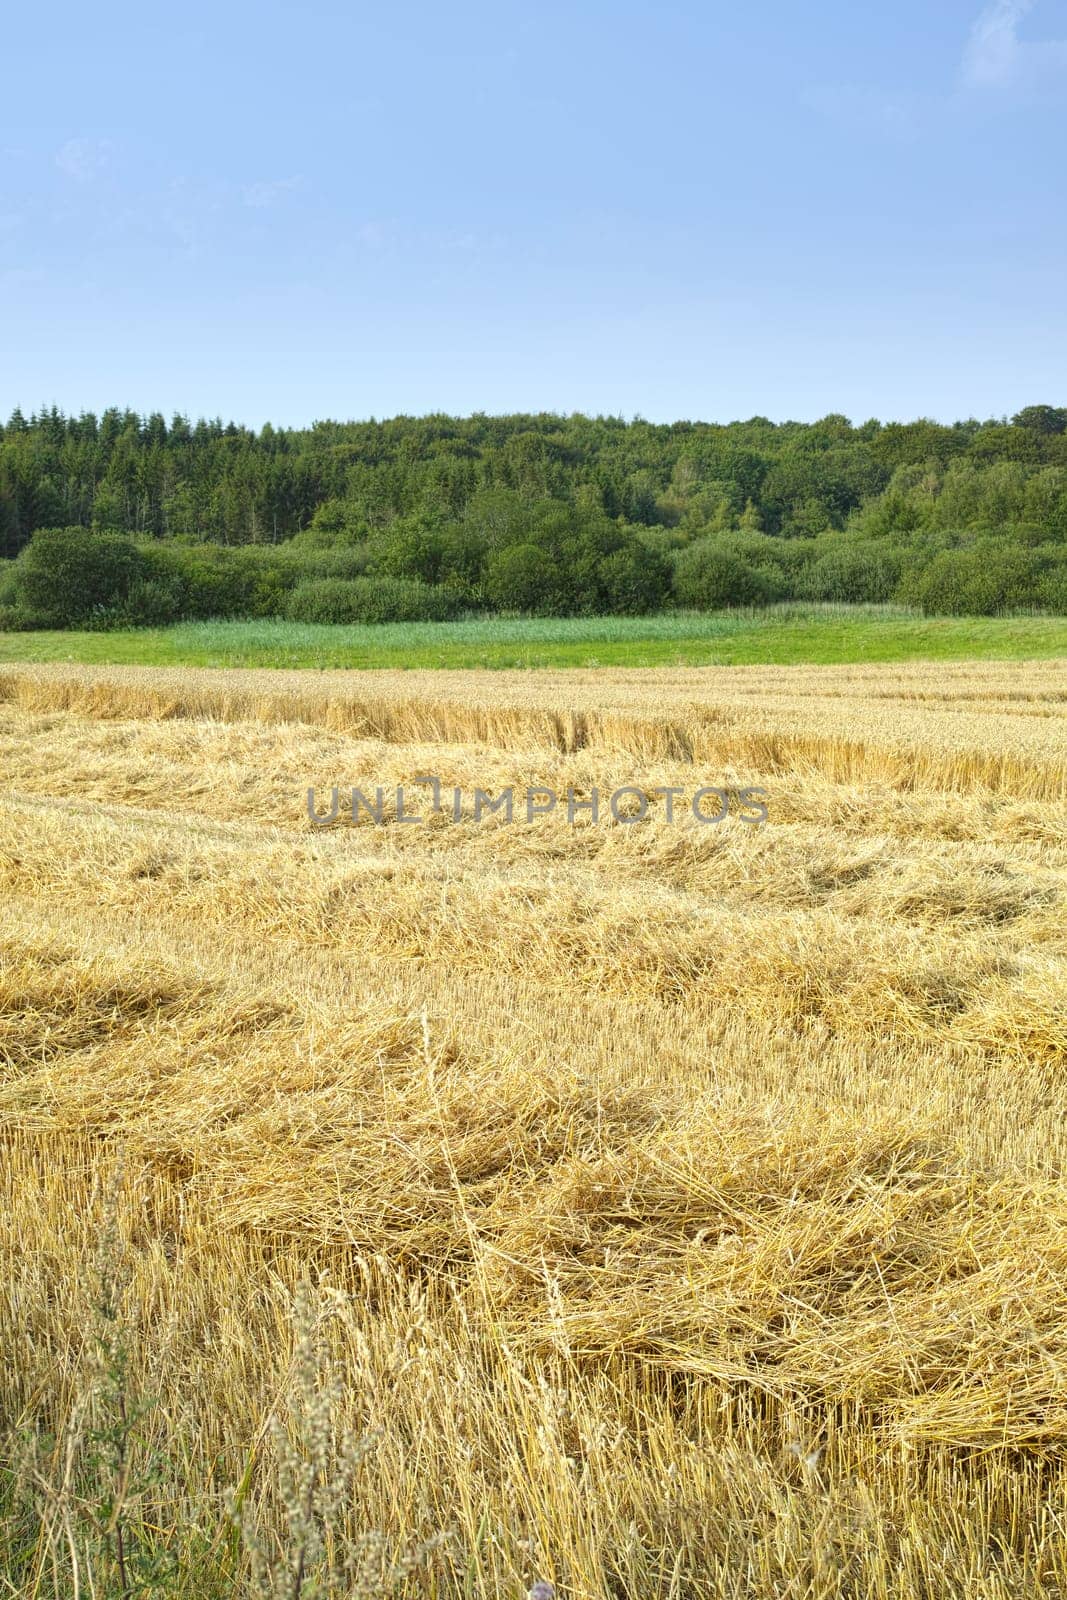 Natural, harvest or agriculture in countryside with wheat, landscape for growth in spring. Sustainable, environment or barley crop, farming export for beer industry on eco friendly farm or field by YuriArcurs